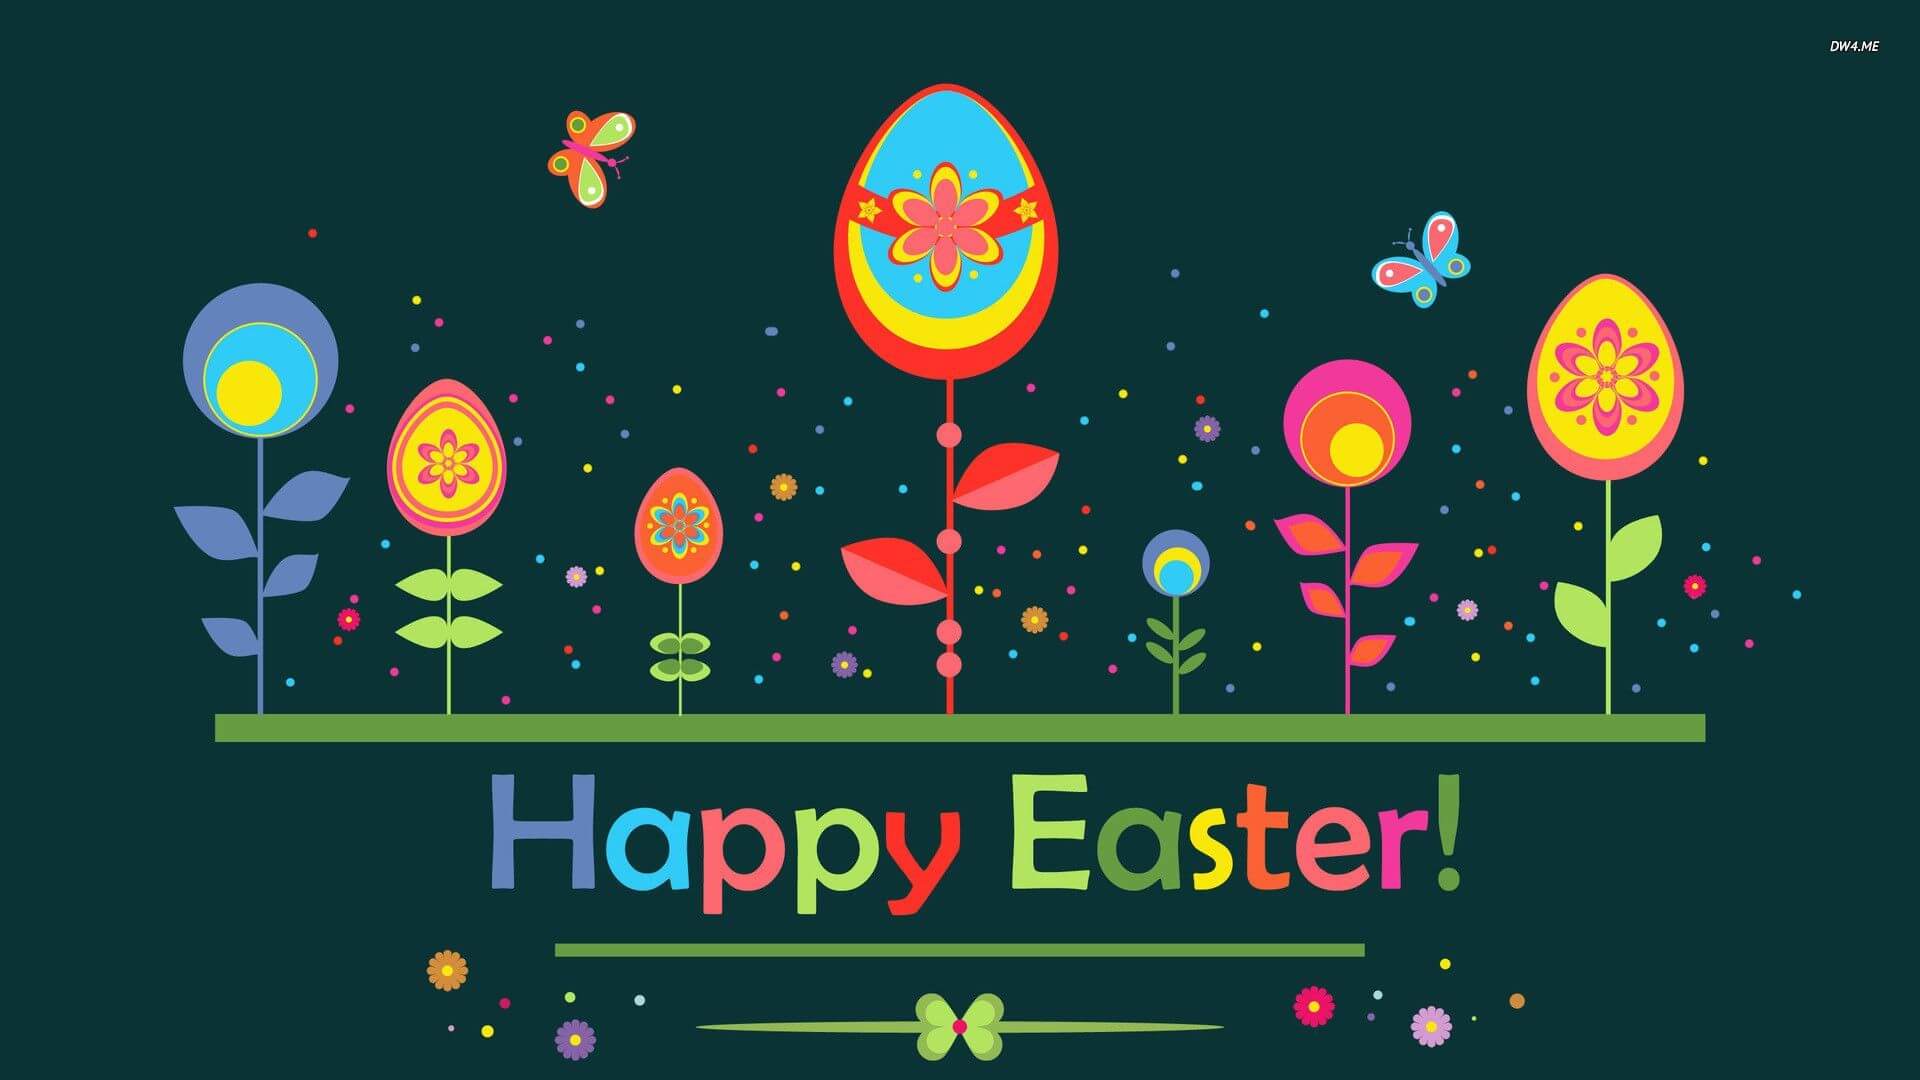 Happy Easter Picture Image Wallpaper Download